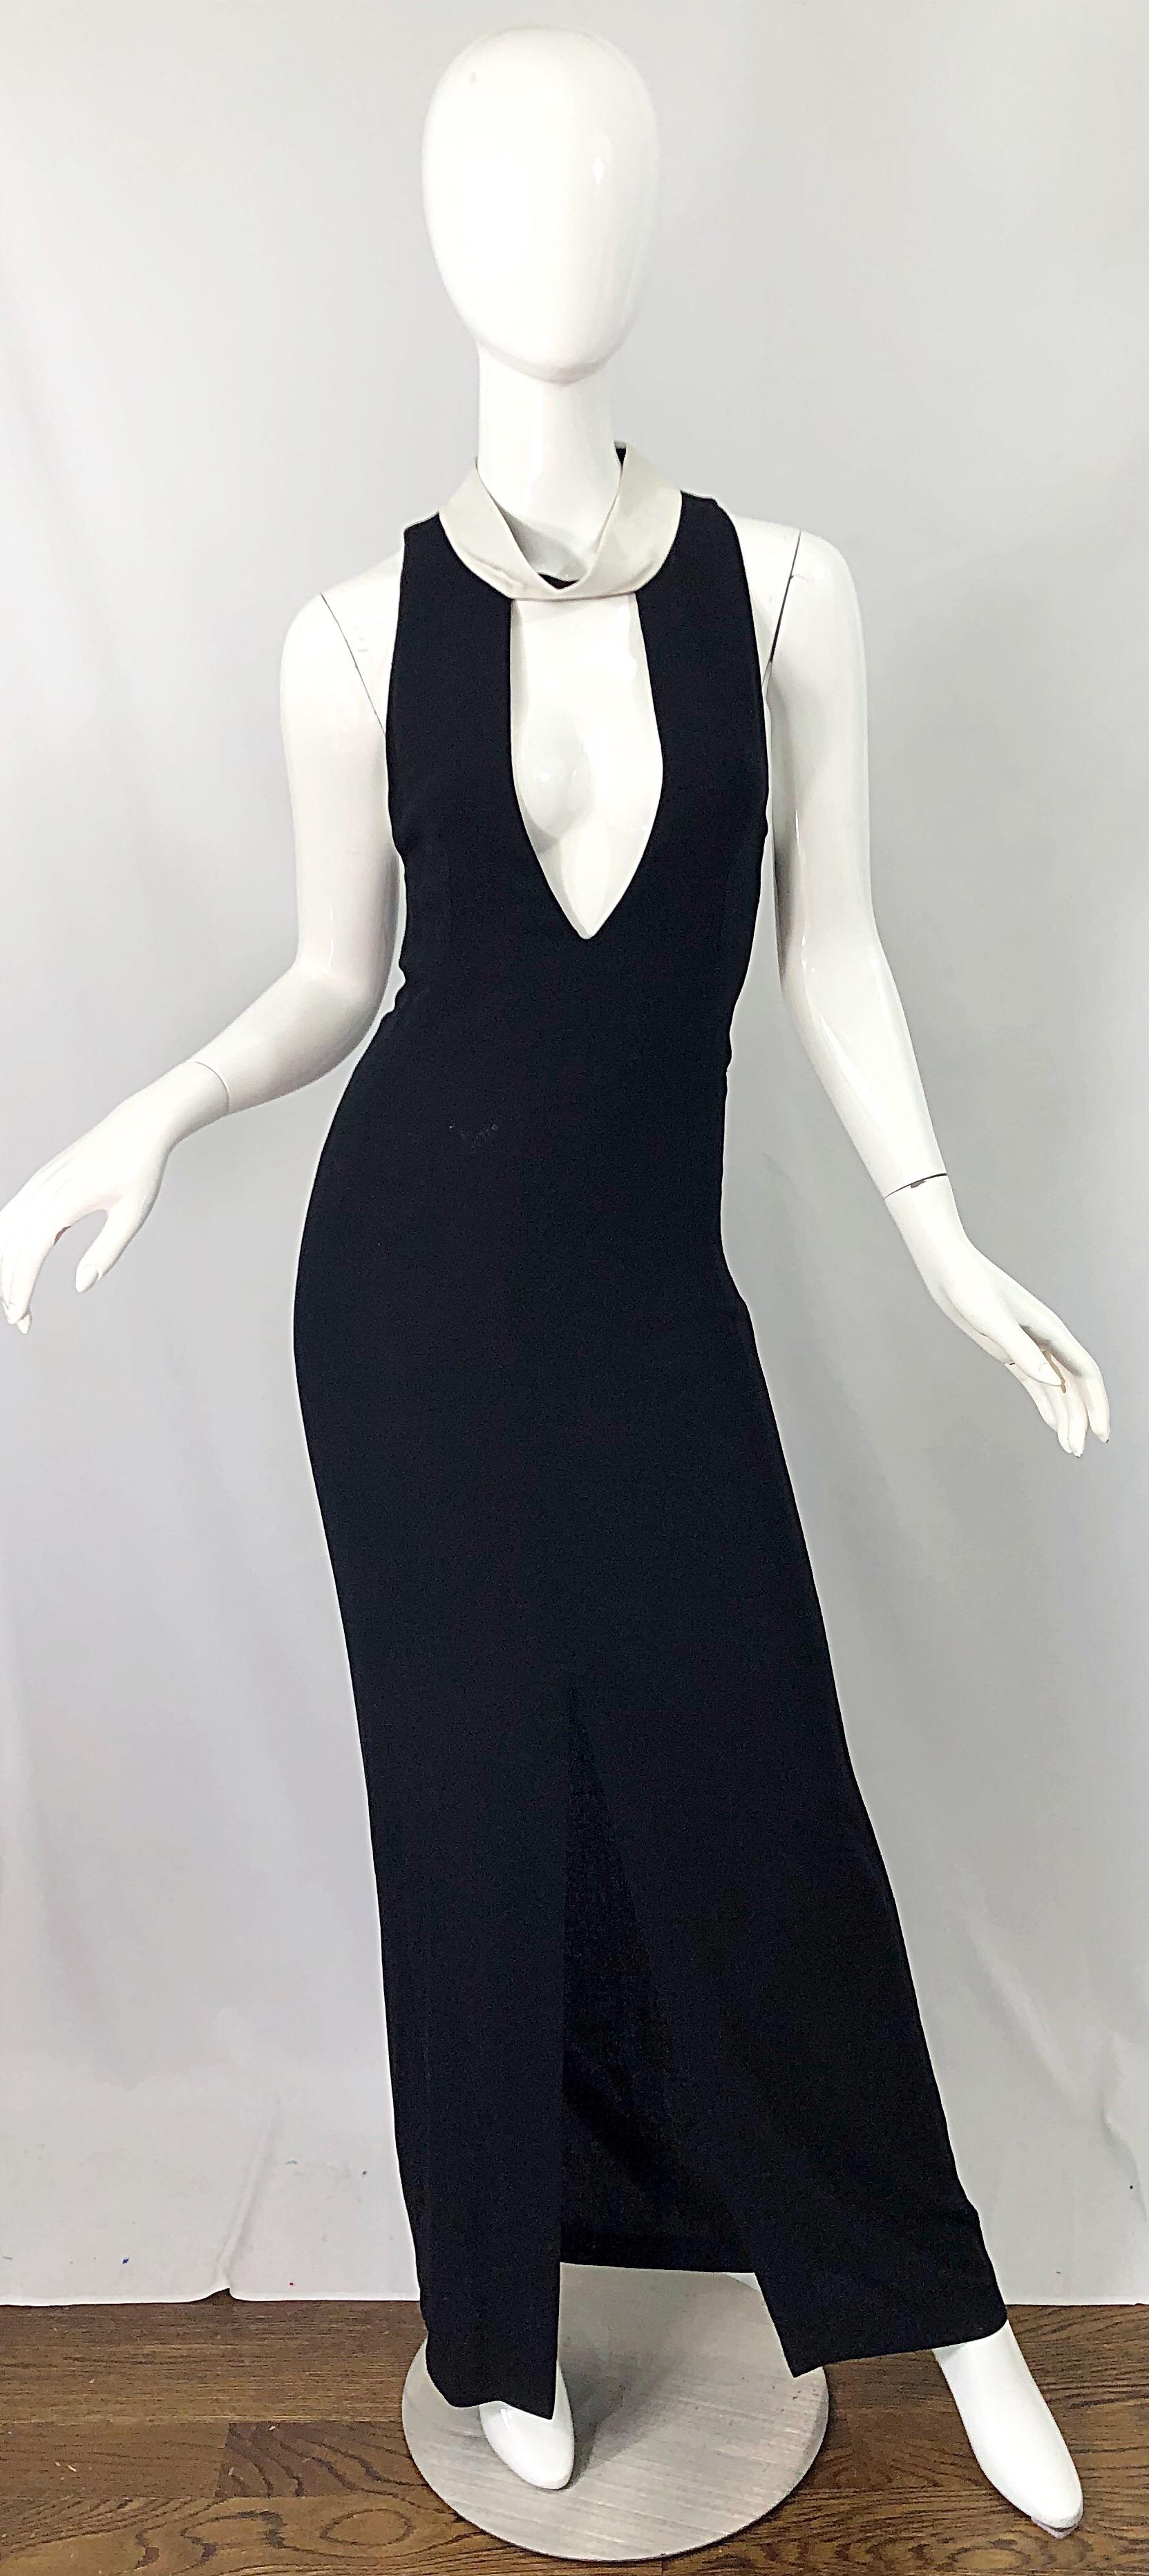 Sexy and highly collectible museum quality vintage YVES SAINT LAURENT YSL by TOM FORD black and white plunging runway cut-out gown ! Features a soft crepe blend fabric that hugs the body beautifully. Plunging neckline with a white funnel like